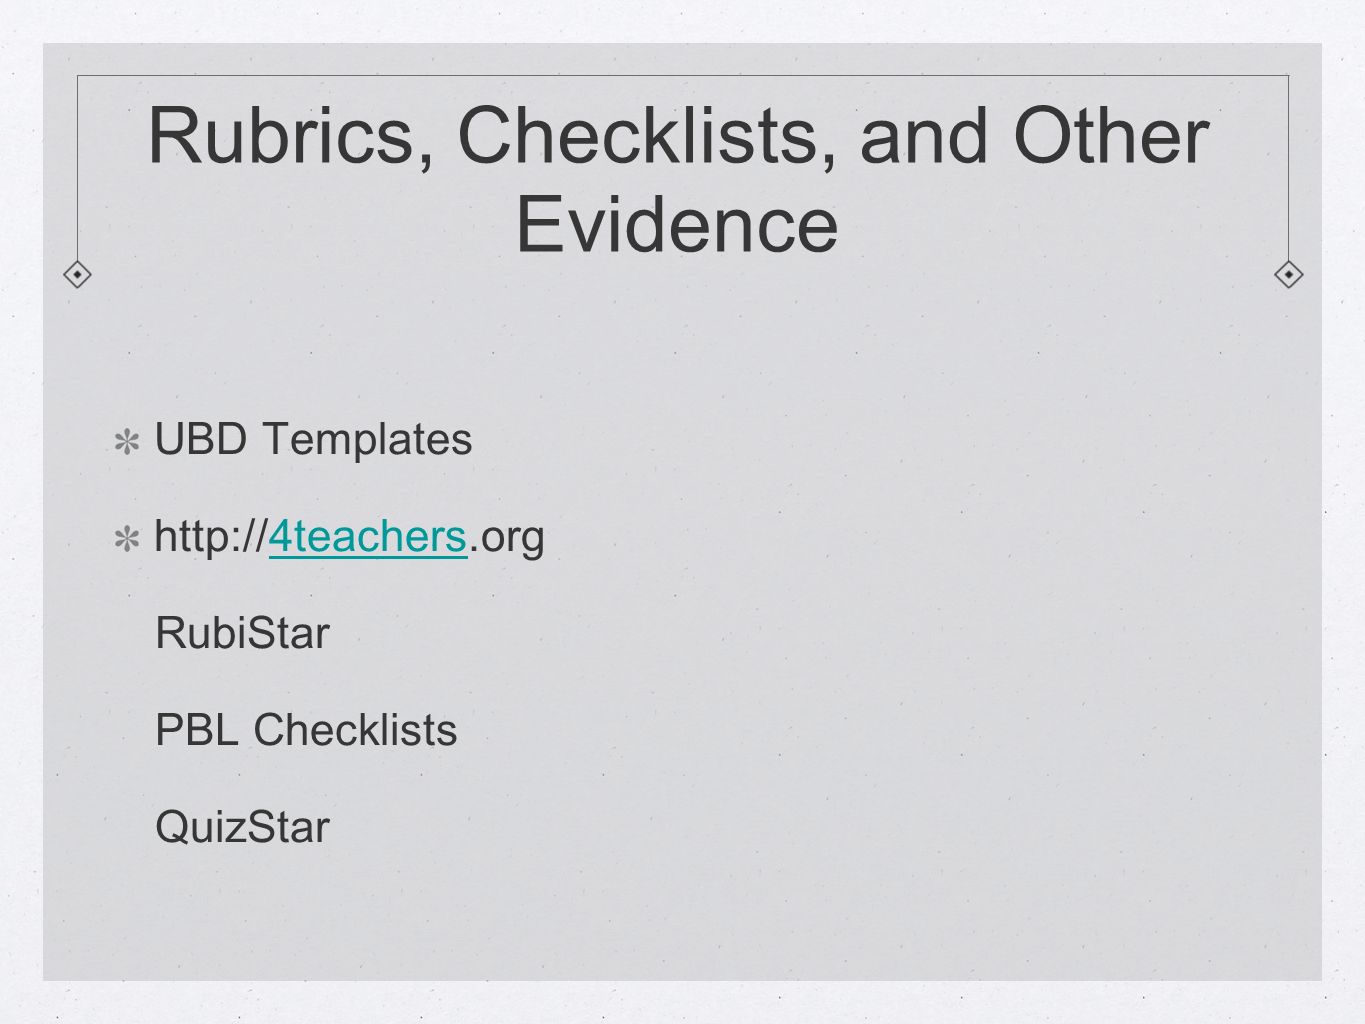 Rubrics, Checklists, and Other Evidence UBD Templates   RubiStar PBL Checklists QuizStar